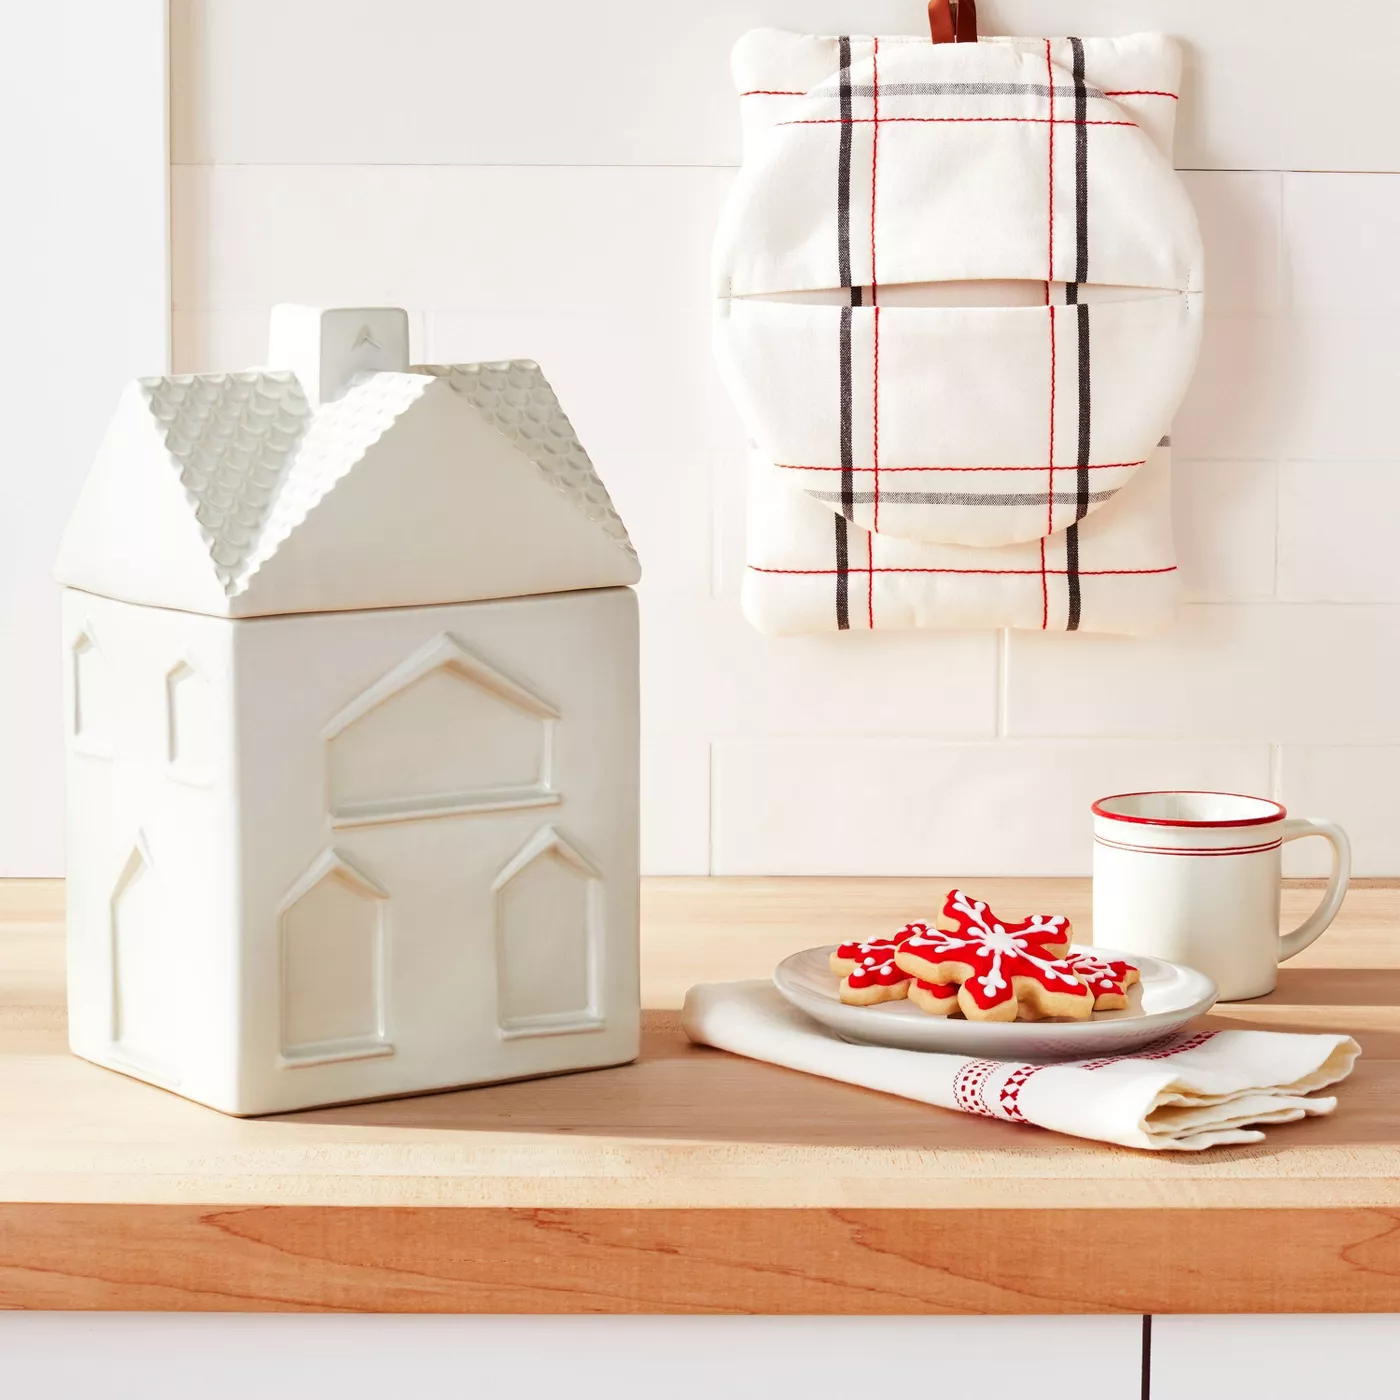 Stoneware House Cookie Jar Sour Cream - Hearth & Hand™ with Magnolia.